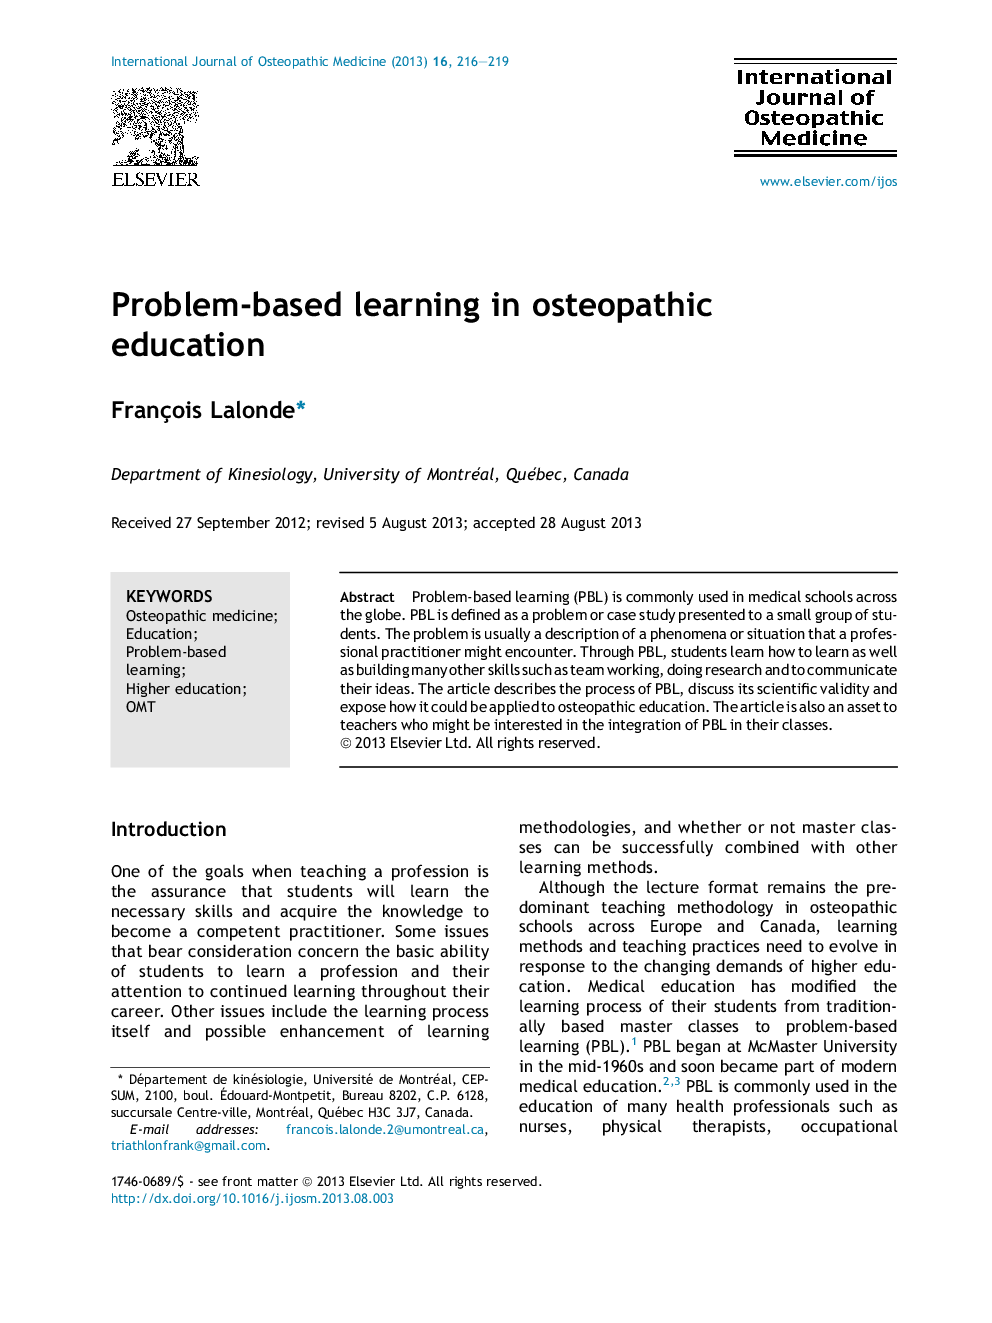 Problem-based learning in osteopathic education